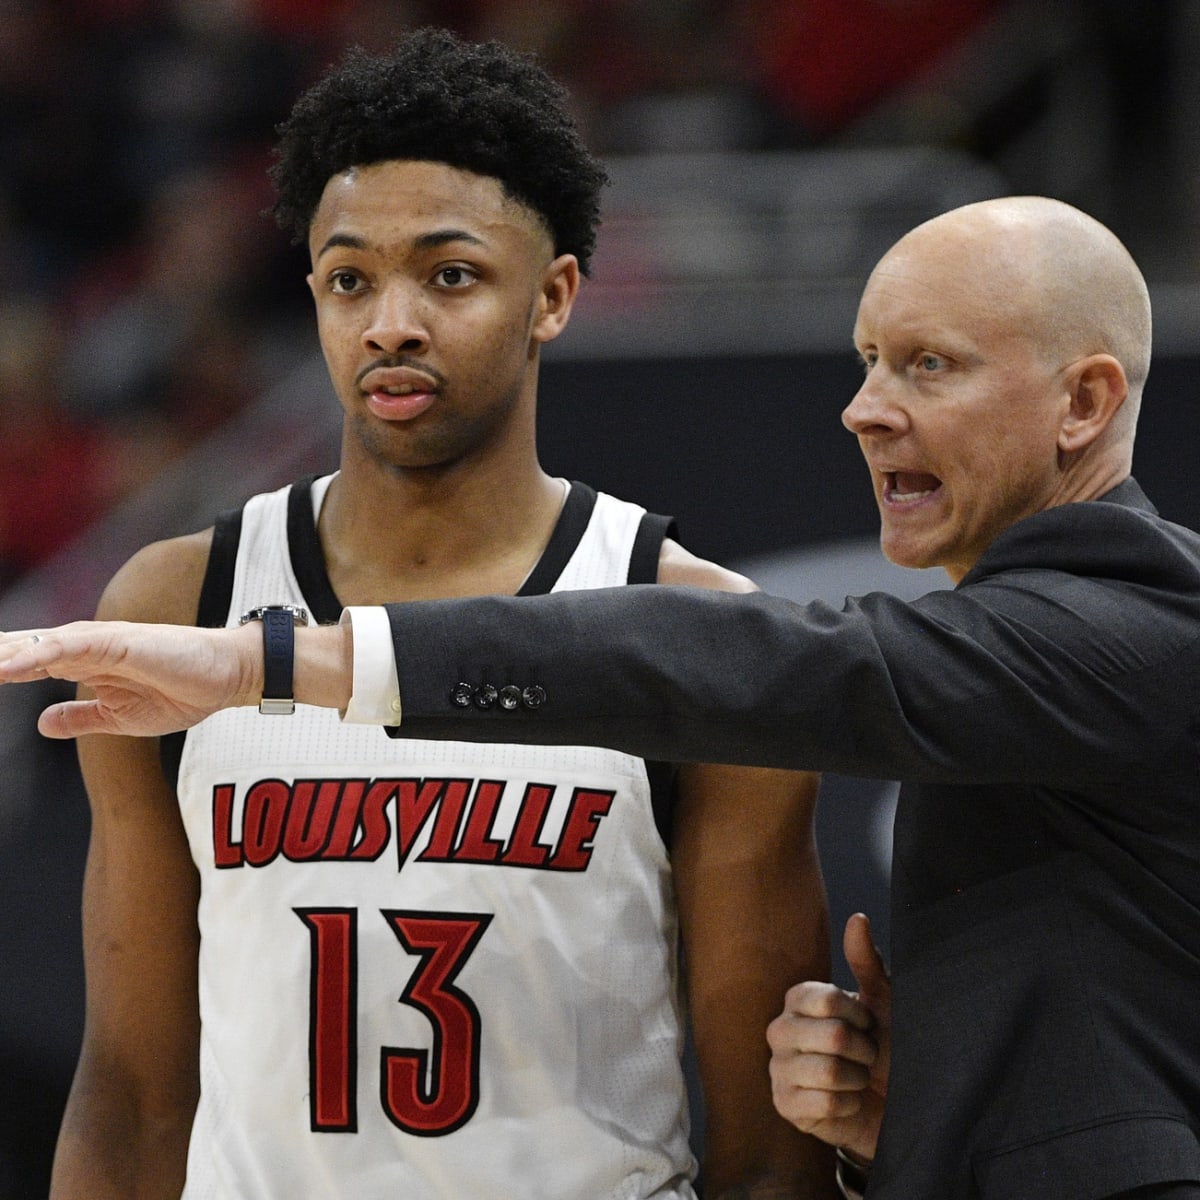 Kenny Payne Sets Good First Impression With Current Louisville Men's  Basketball Players - Sports Illustrated Louisville Cardinals News, Analysis  and More